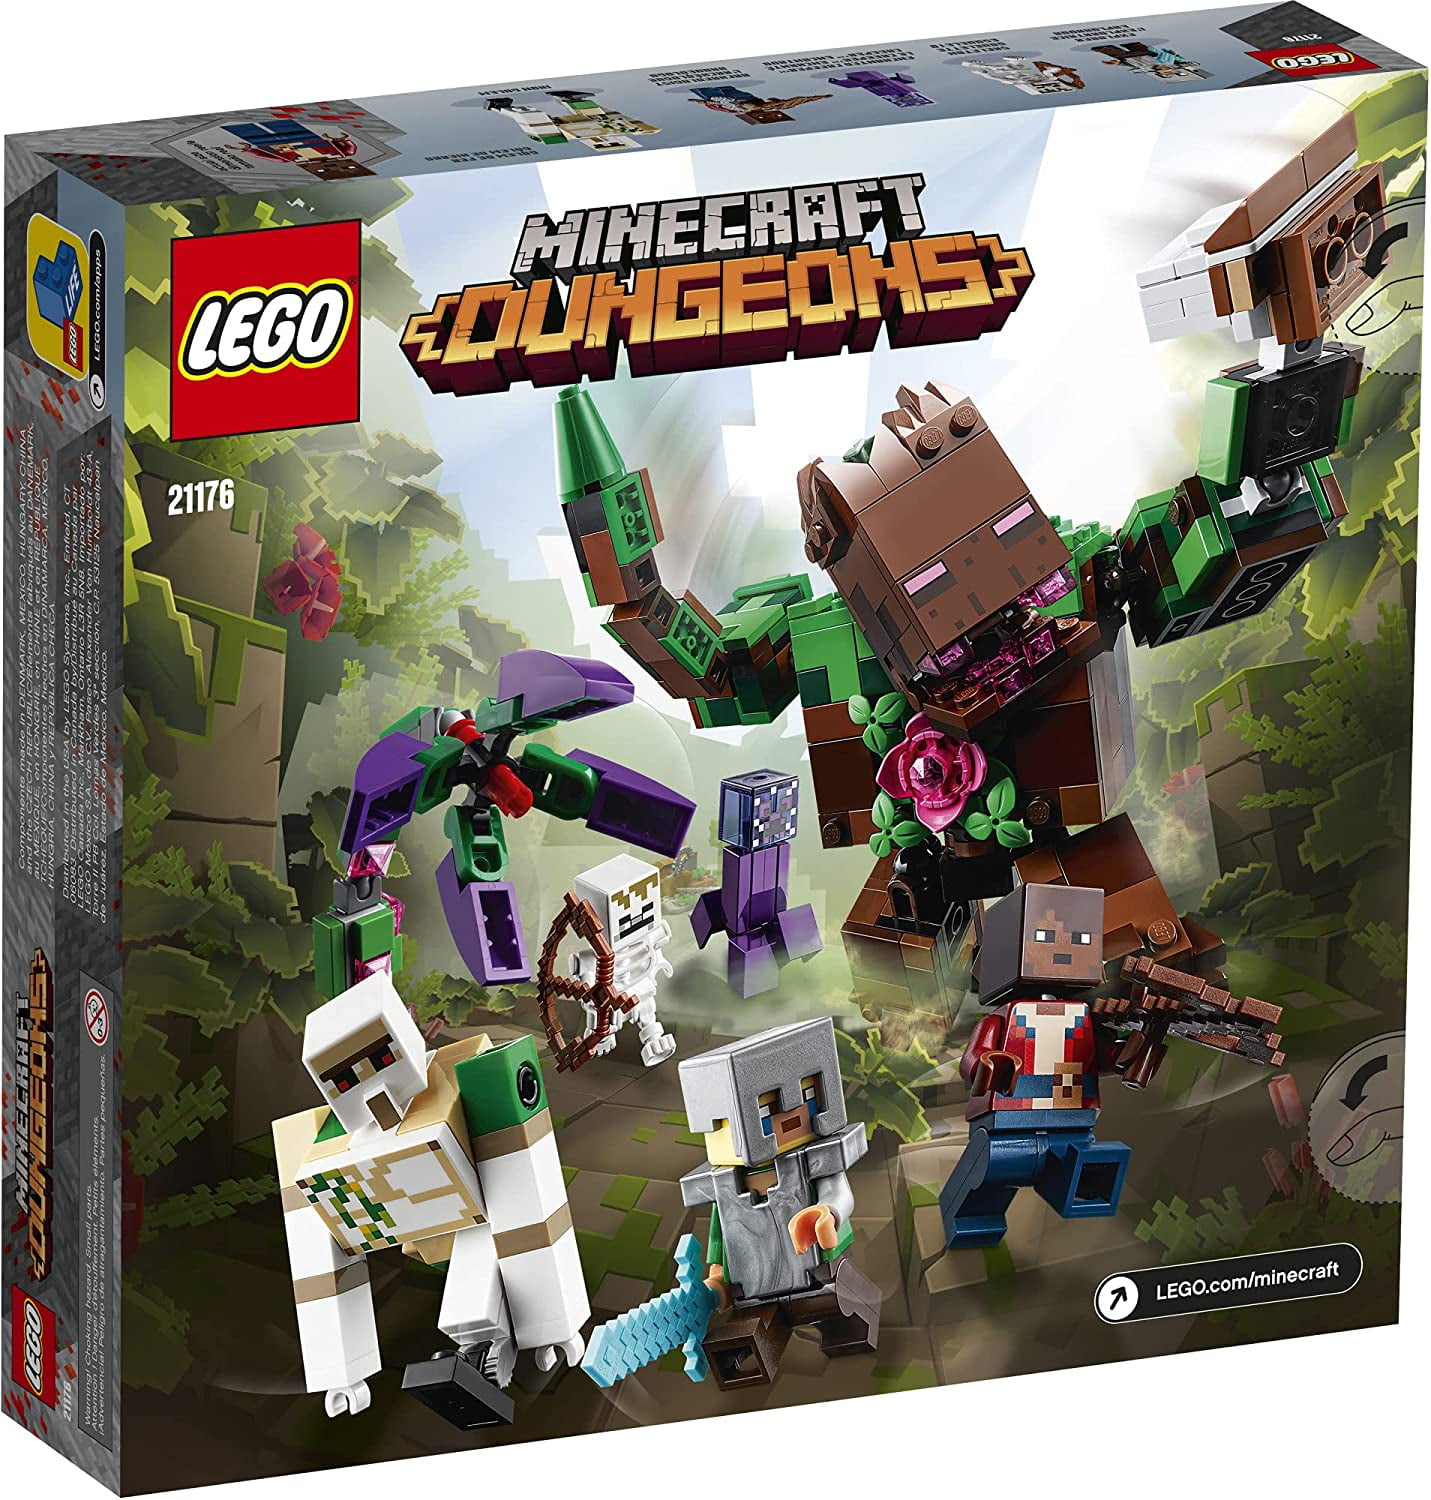 Minecraft Jungle Abomination 21176 Playset; Fun Minecraft Dungeons Exploring Toy for Kids; New 2021 (489 Pieces) - Walmart.com